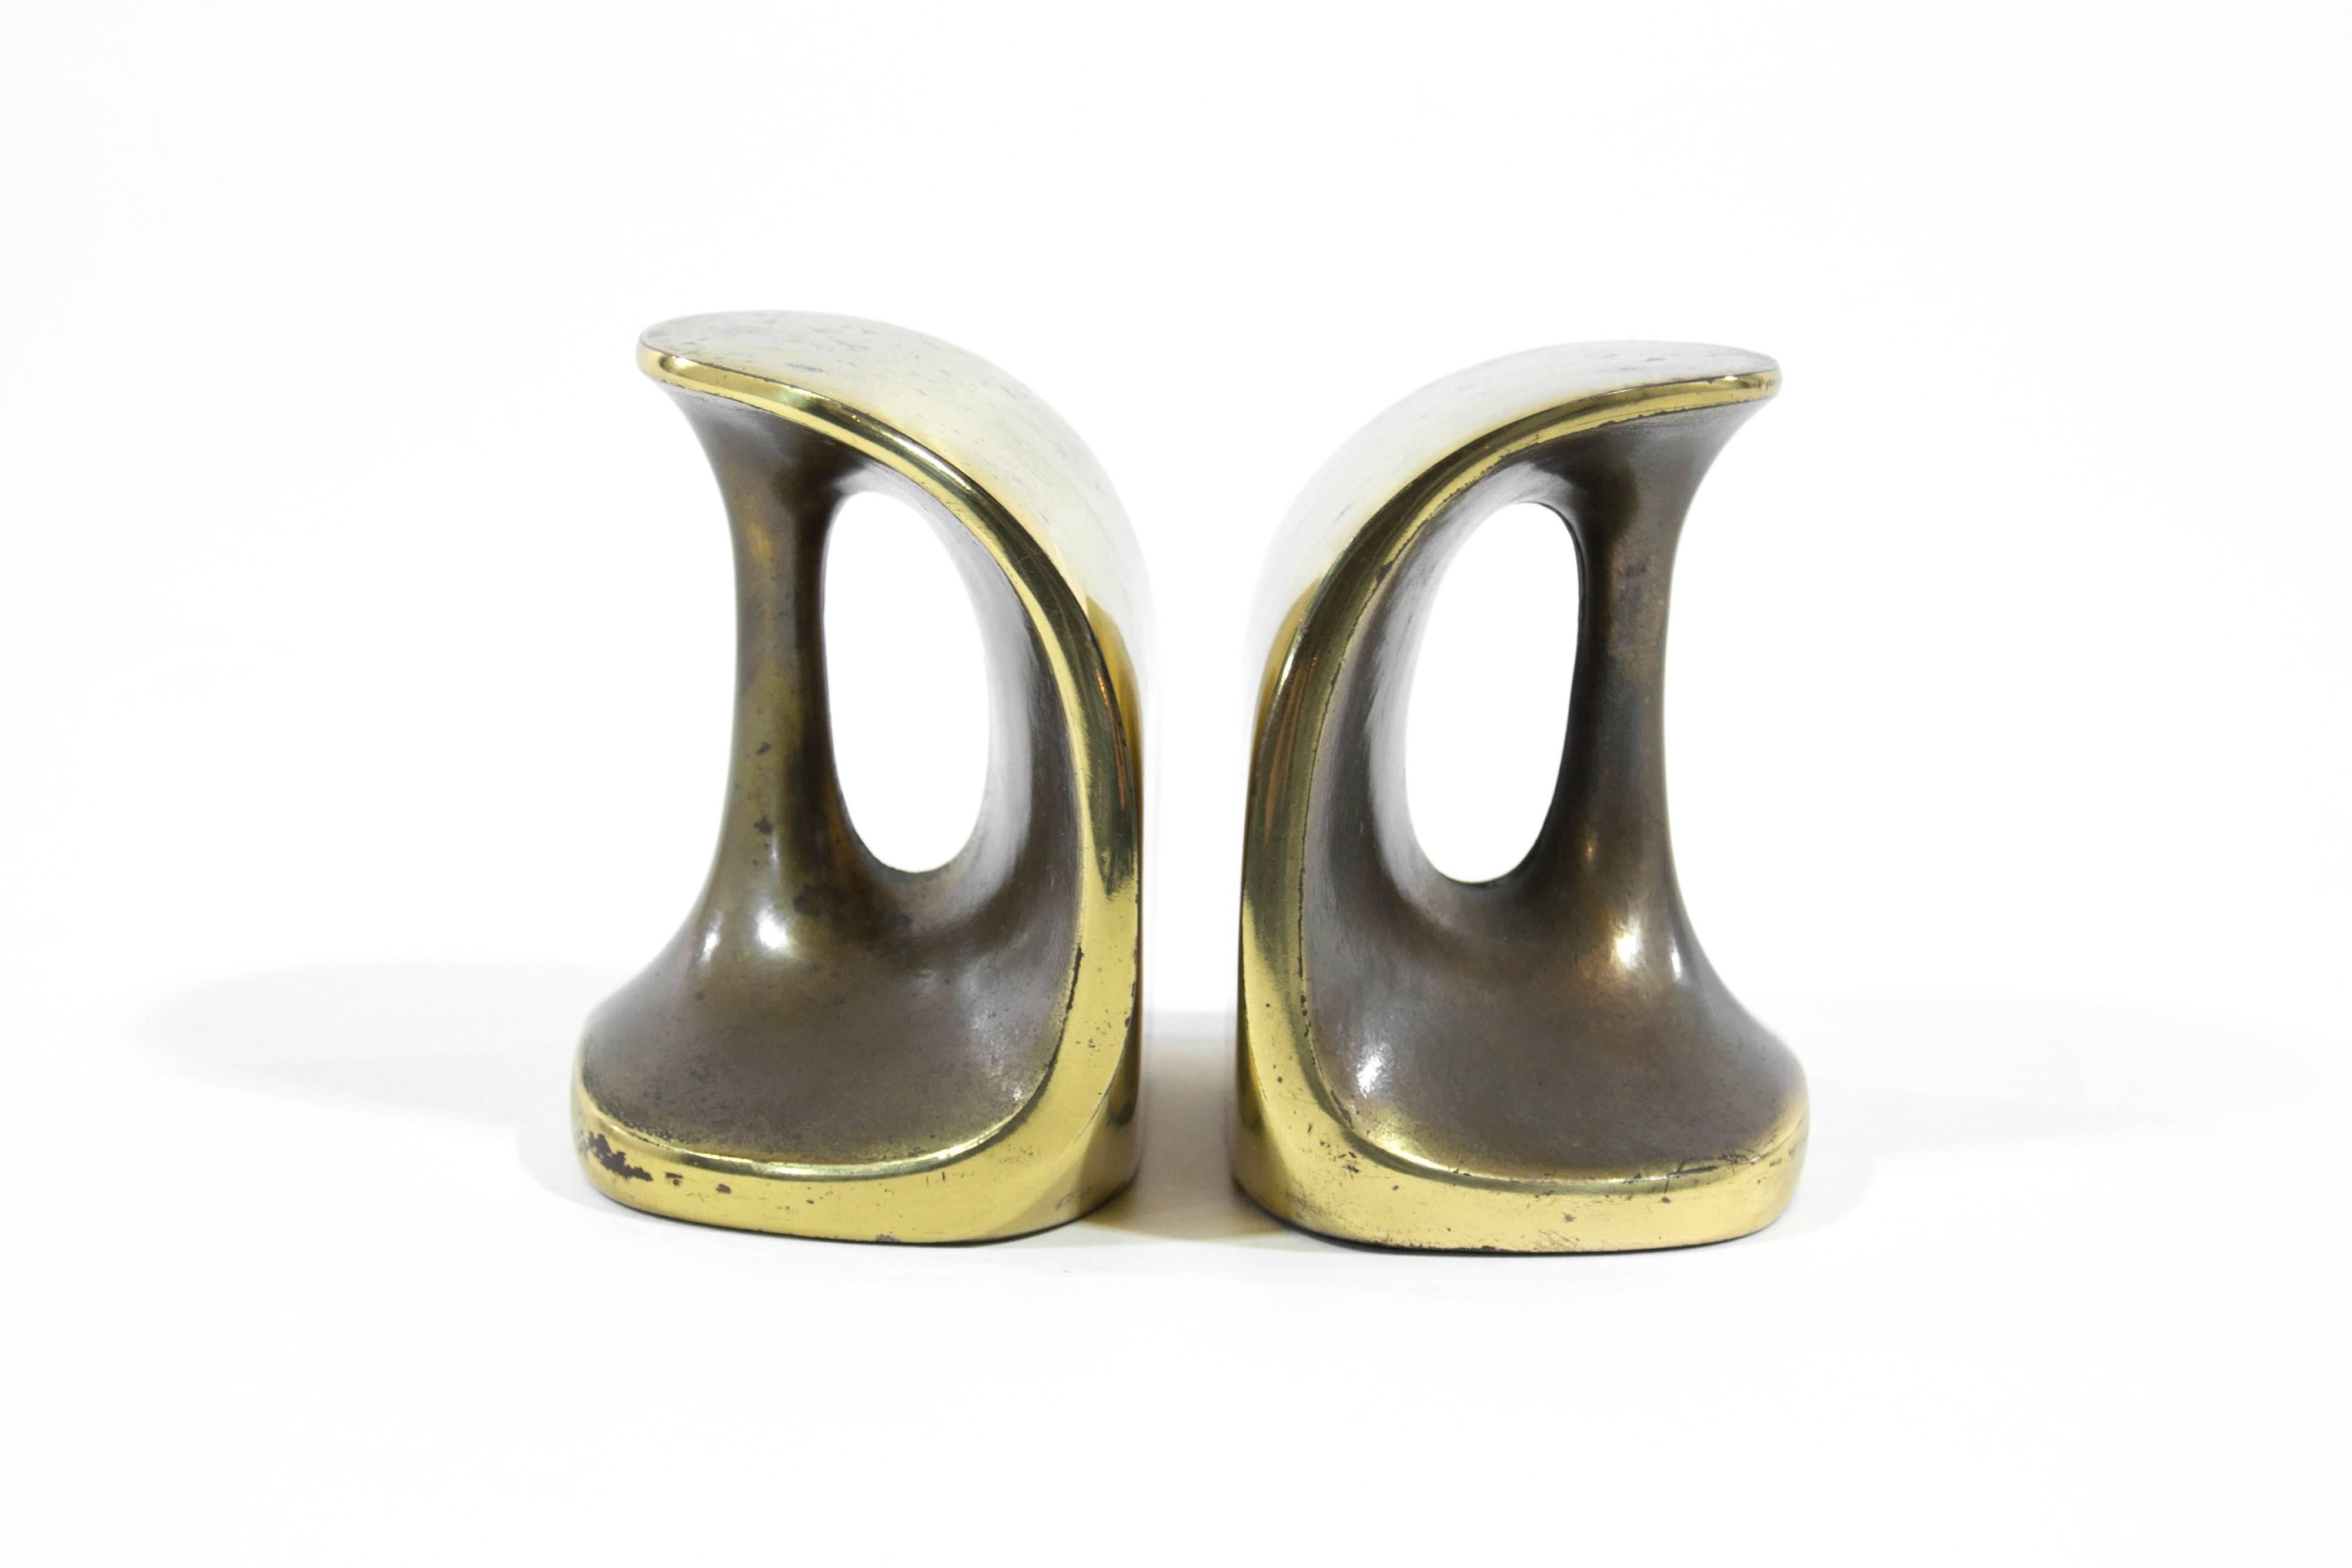 Mid-Century Modern Patinated Brass Bookends by Ben Seibel for Jenfred Ware